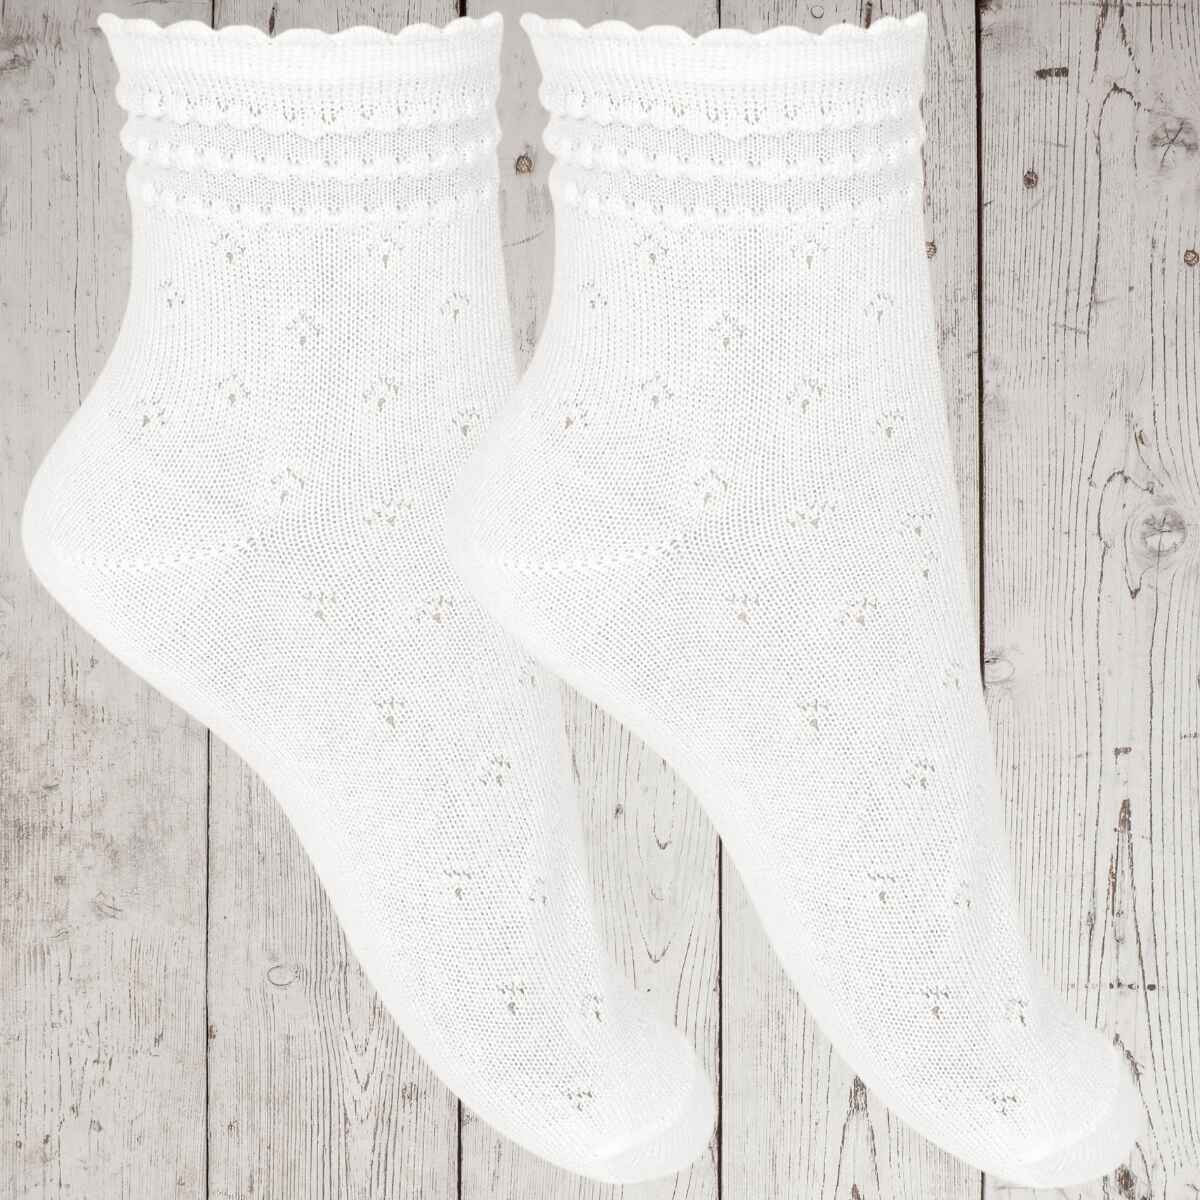 CEREMONY ANKLE SOCKS WITH RELIEF BORDER CONDOR - 1